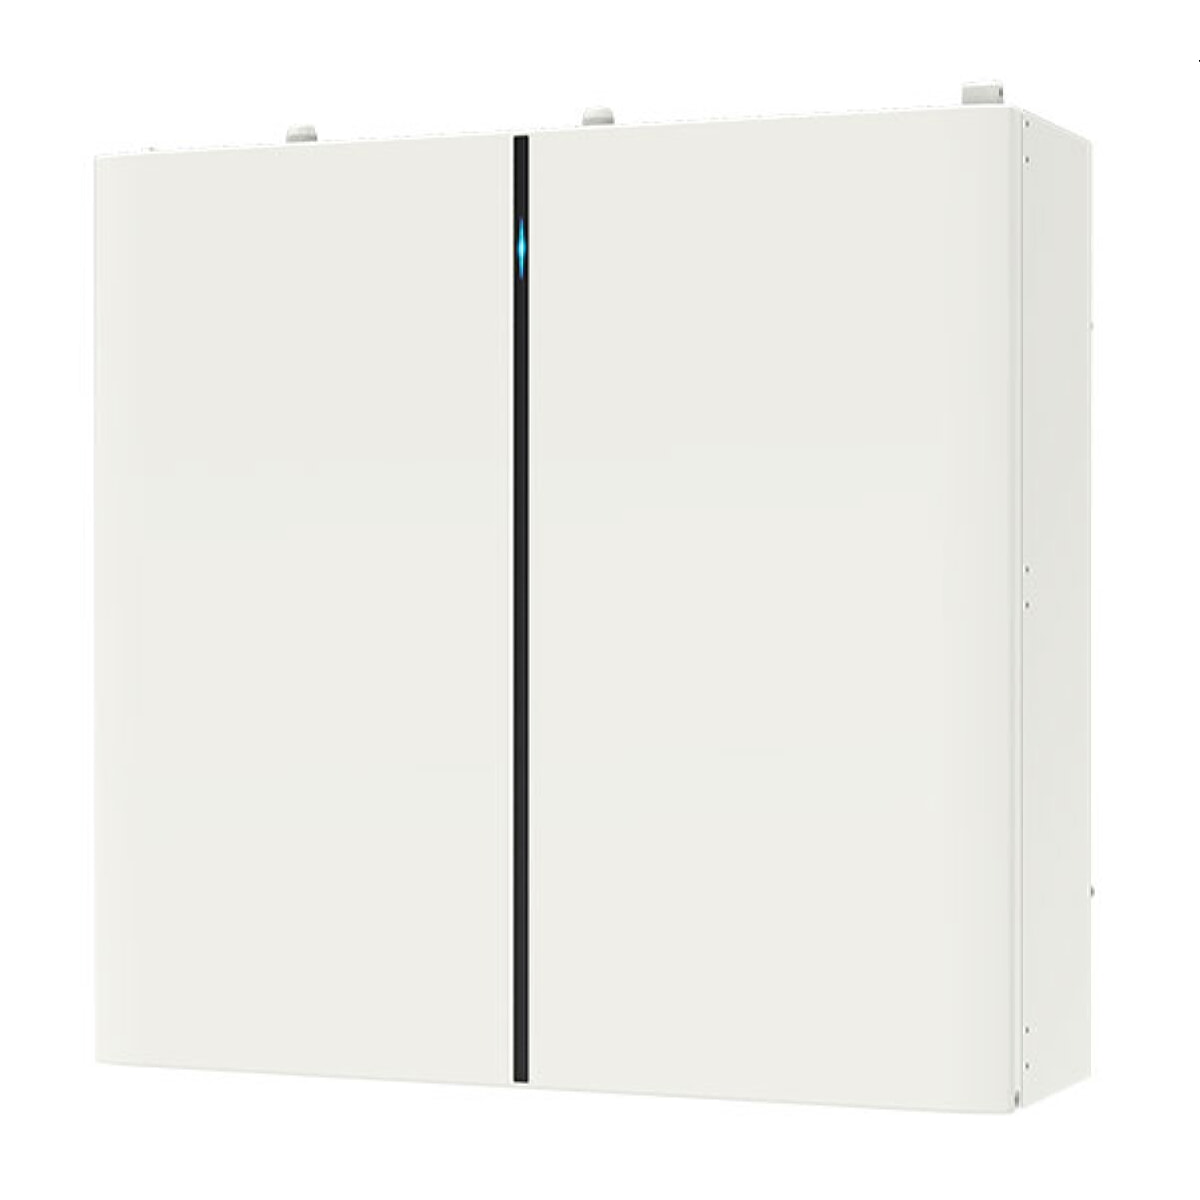 SolaX Triple Power Battery T30 3.0 kWh V2